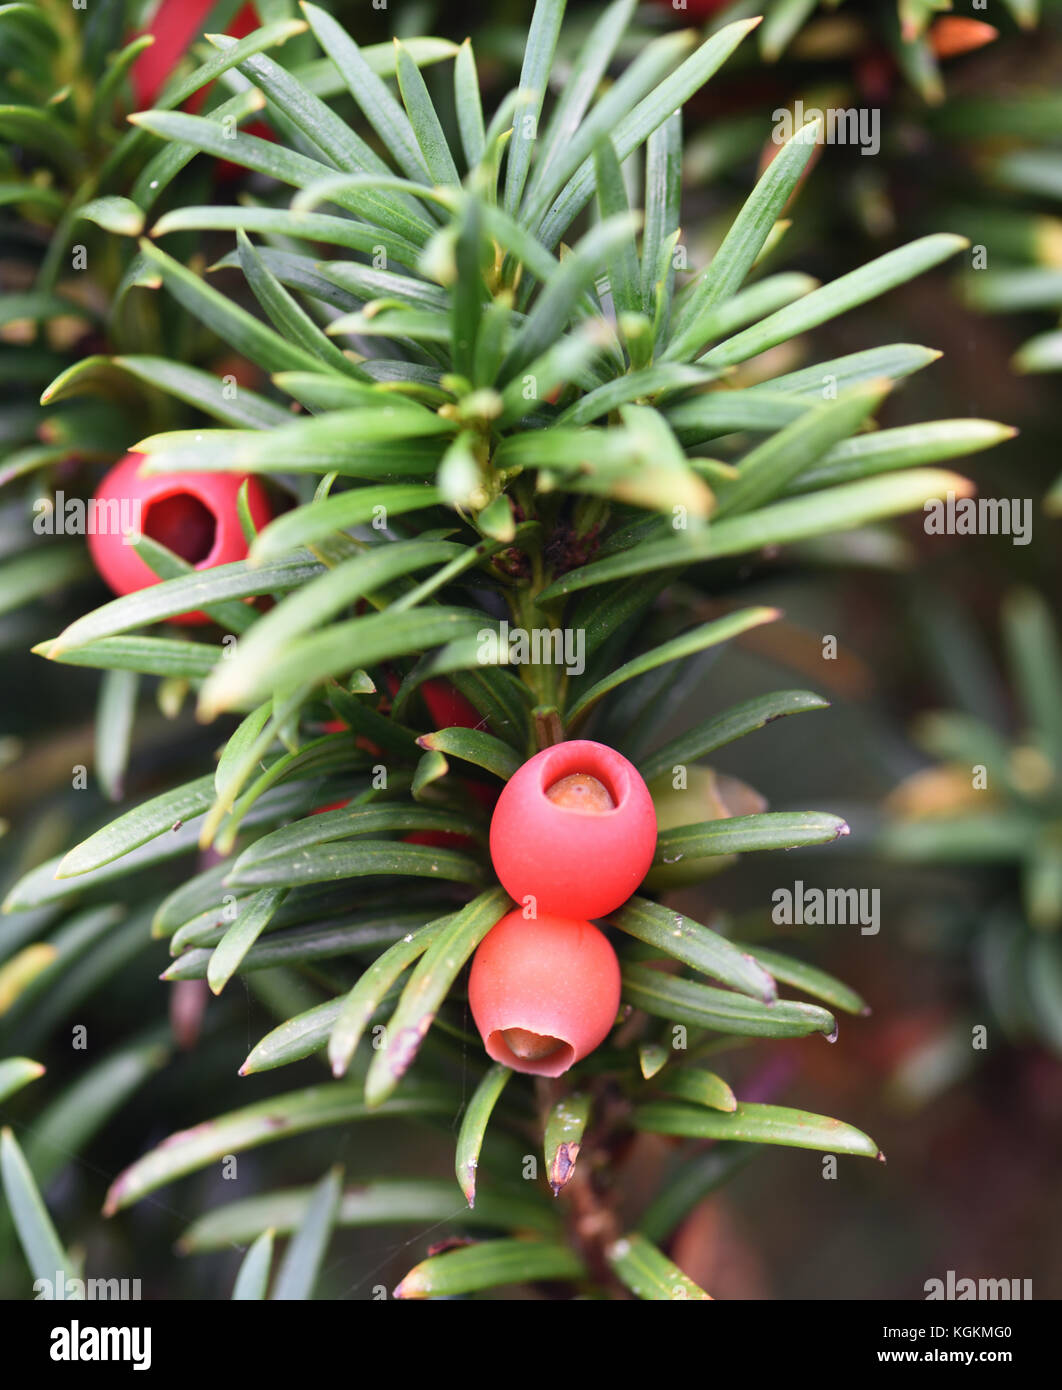 Fruiting structures, arils, and seeds of Yew (Taxus baccata). Burwash, Sussex, UK Stock Photo